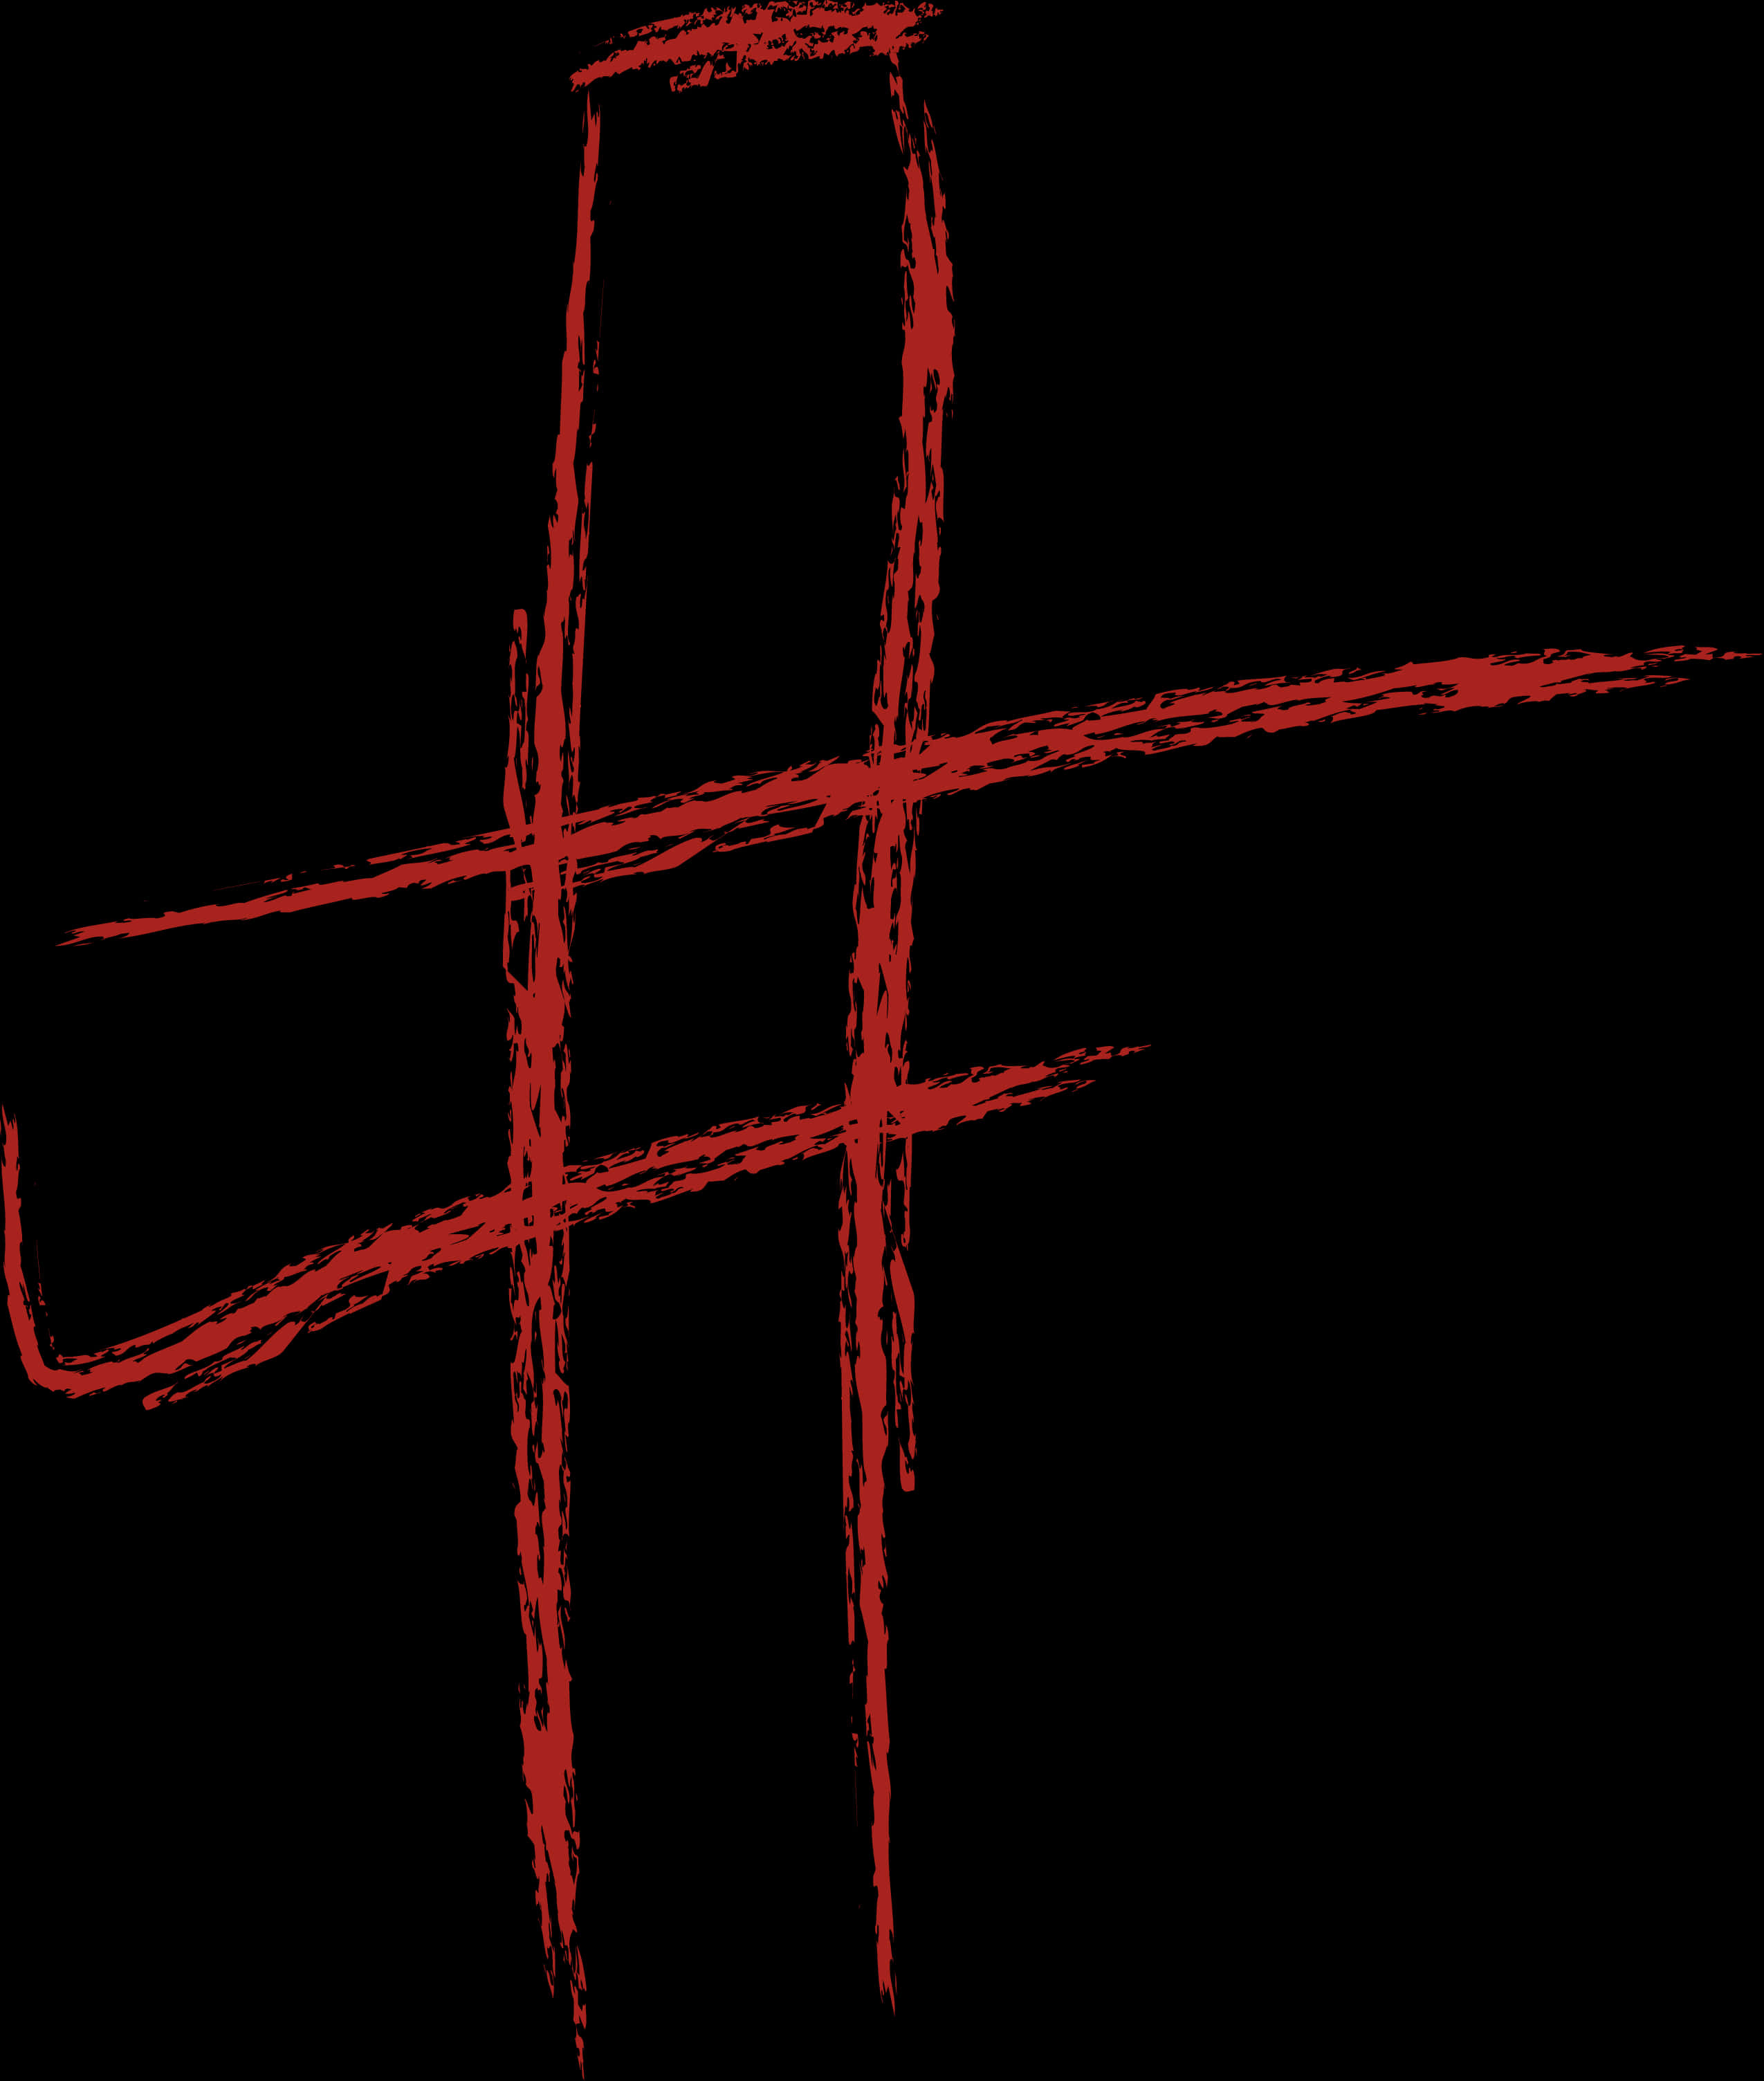 A Red Hashtag Symbol On A Black Background